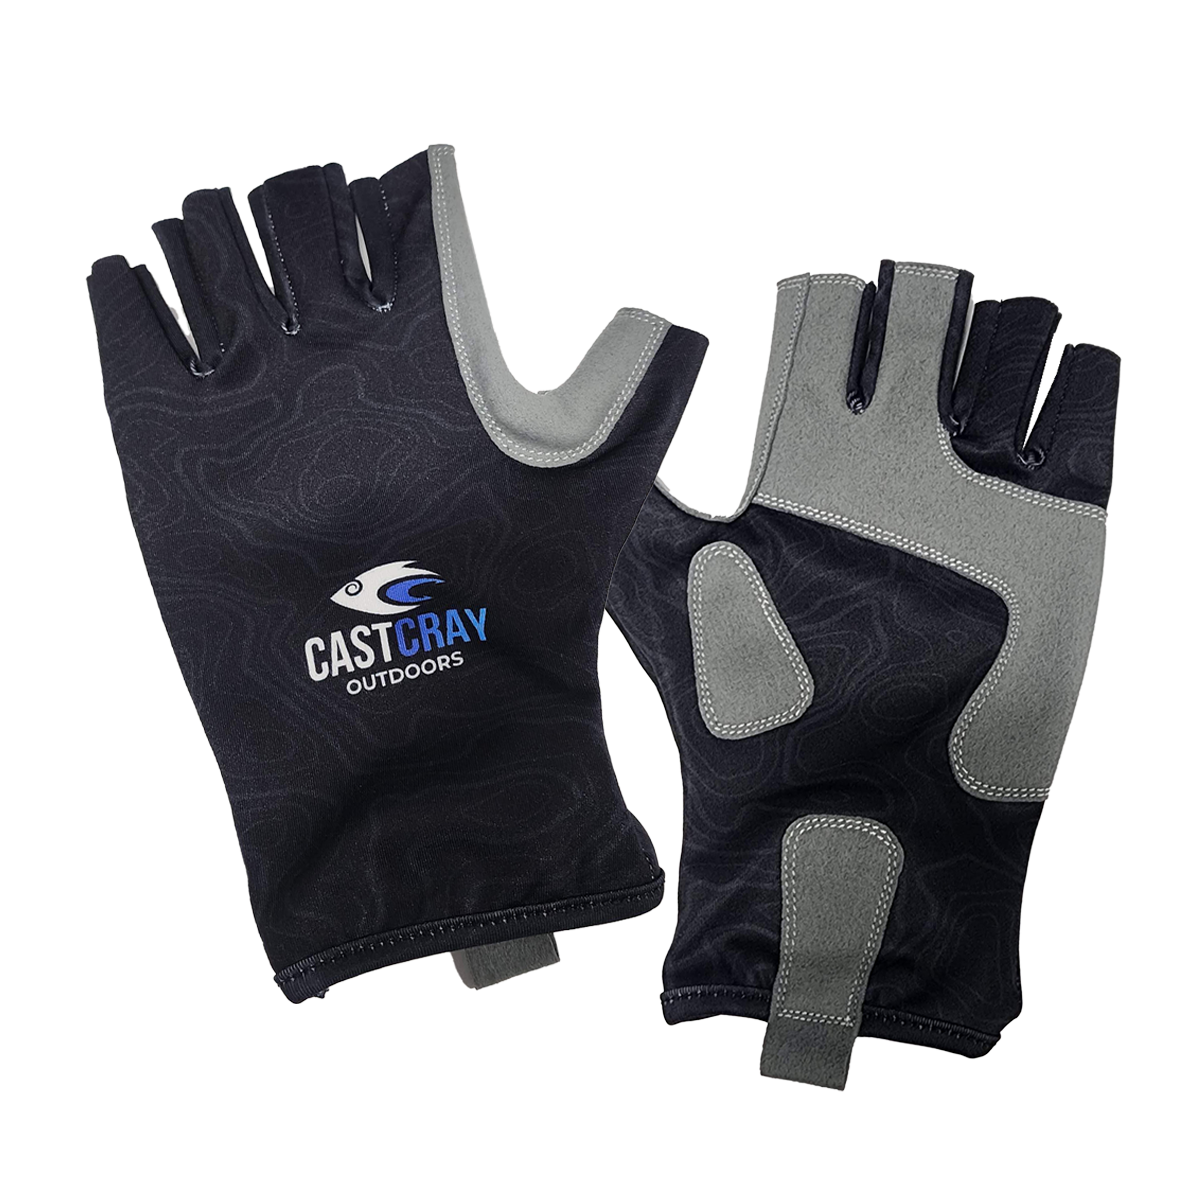 Cast Cray Fishing Gloves - Cast Cray Outdoors